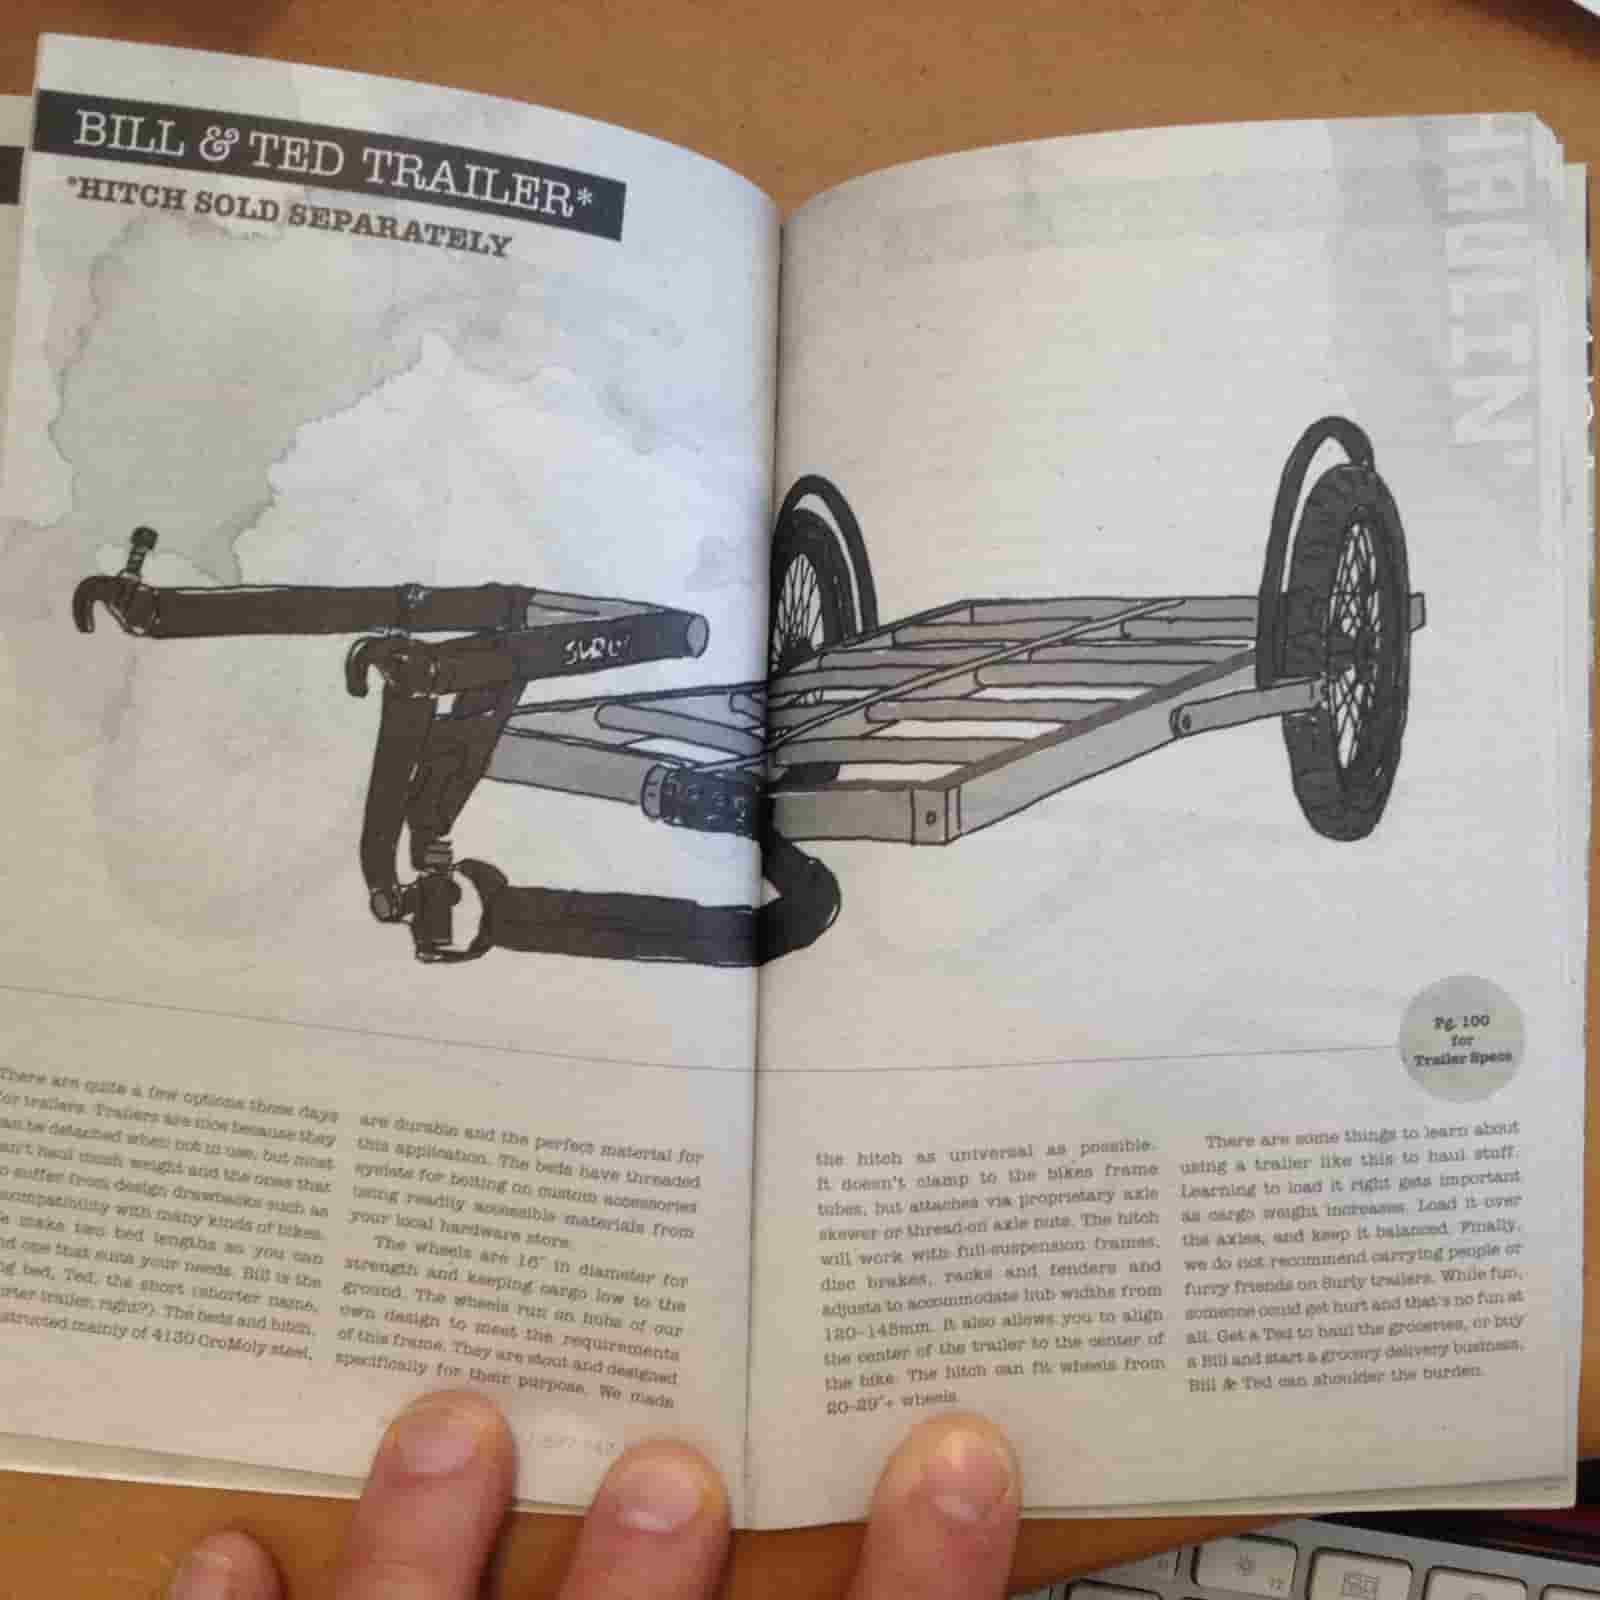 Downward view of an open catalog spread, showing a Surly Bill and Ted bike trailer above, and text below